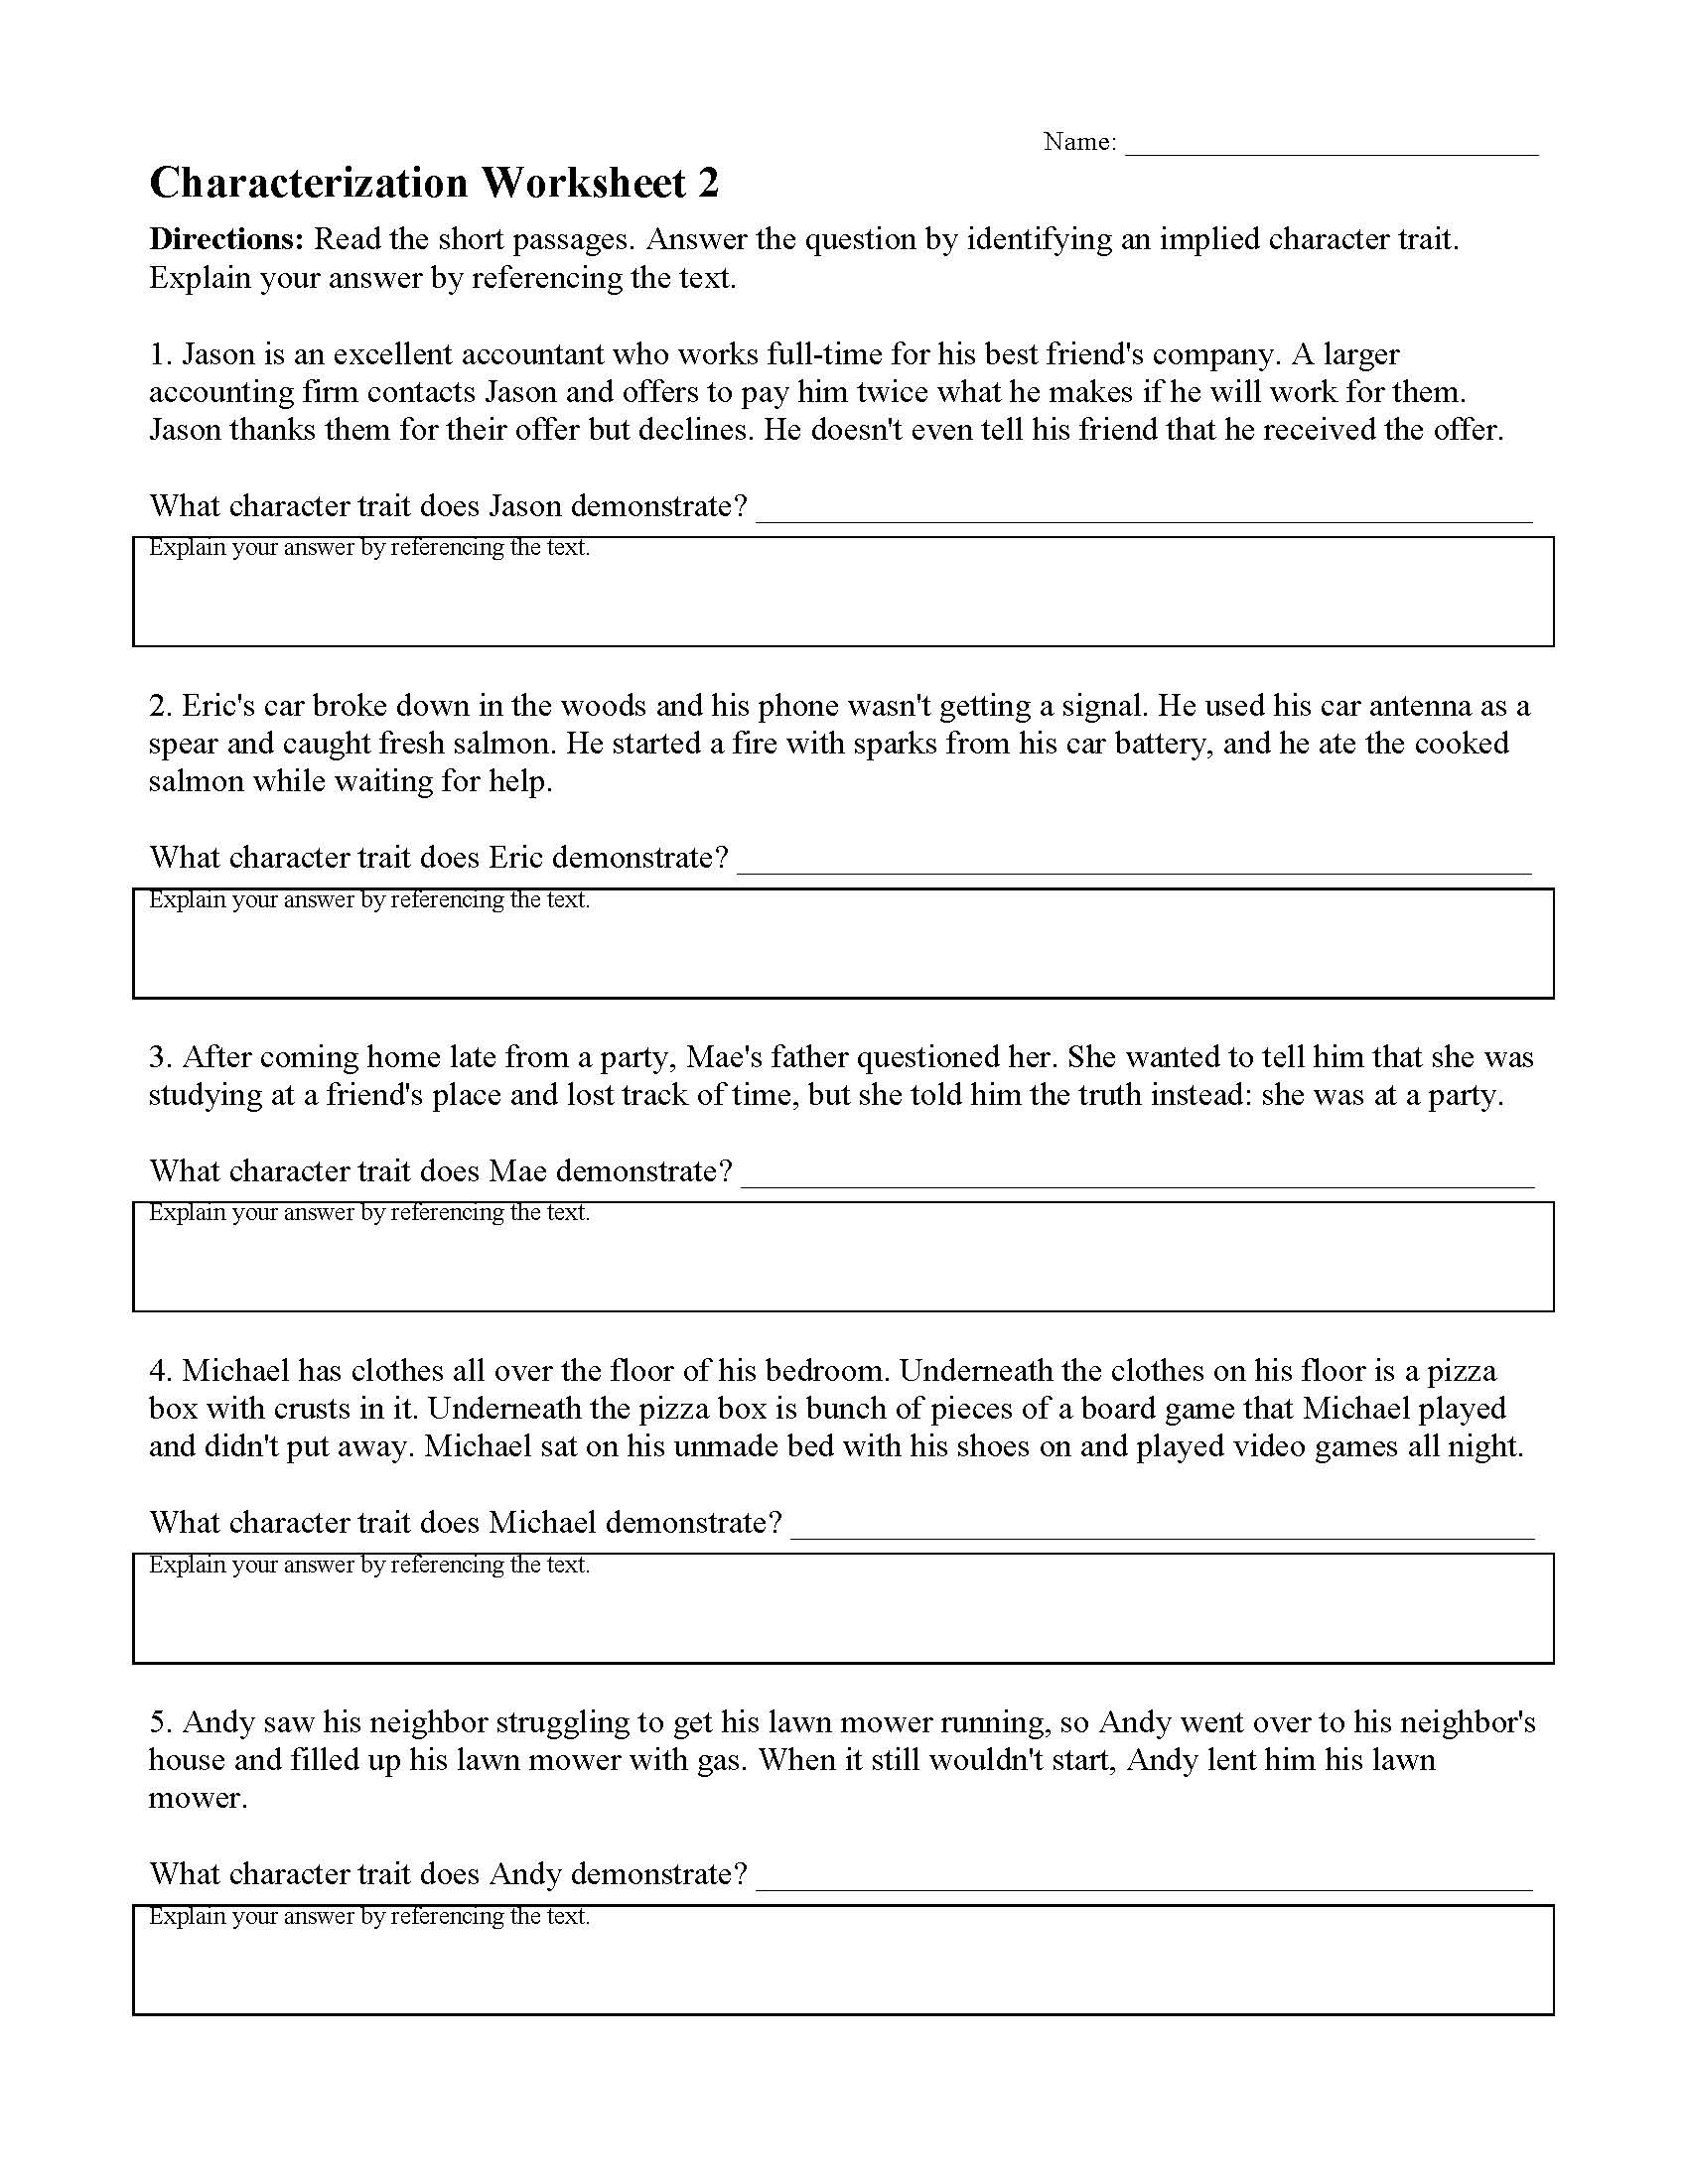 Characterization Worksheet 2  Preview